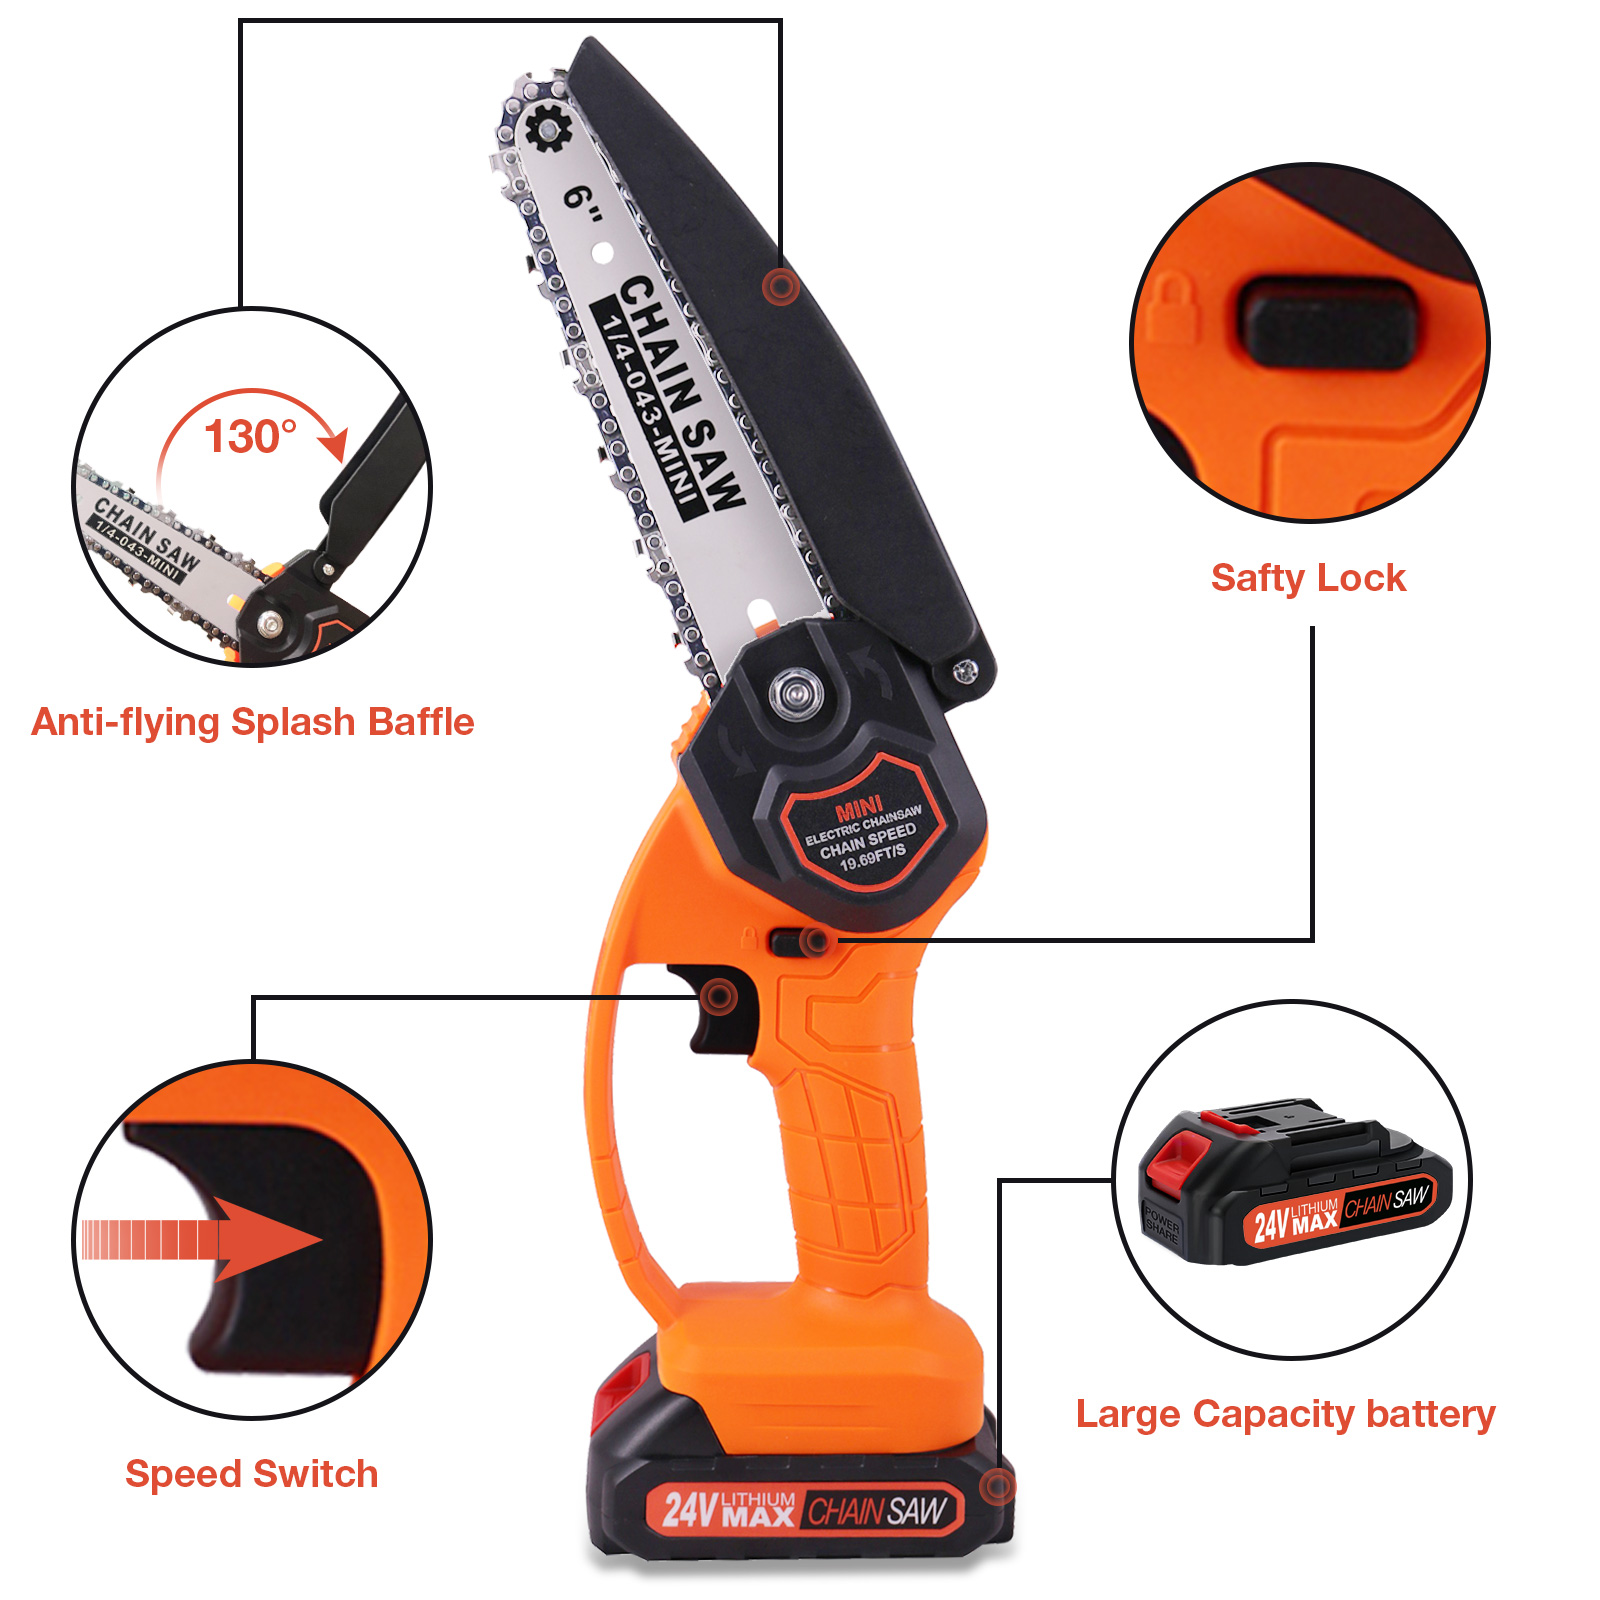 NEXPOW 6" Mini Chainsaw 24V Battery Powered Chainsaw ,with Safety Lock,with 2 Batteries 2 Chains, 6-inch Cordless Handheld Chain Saw Wood Cutter,Orange - image 3 of 8